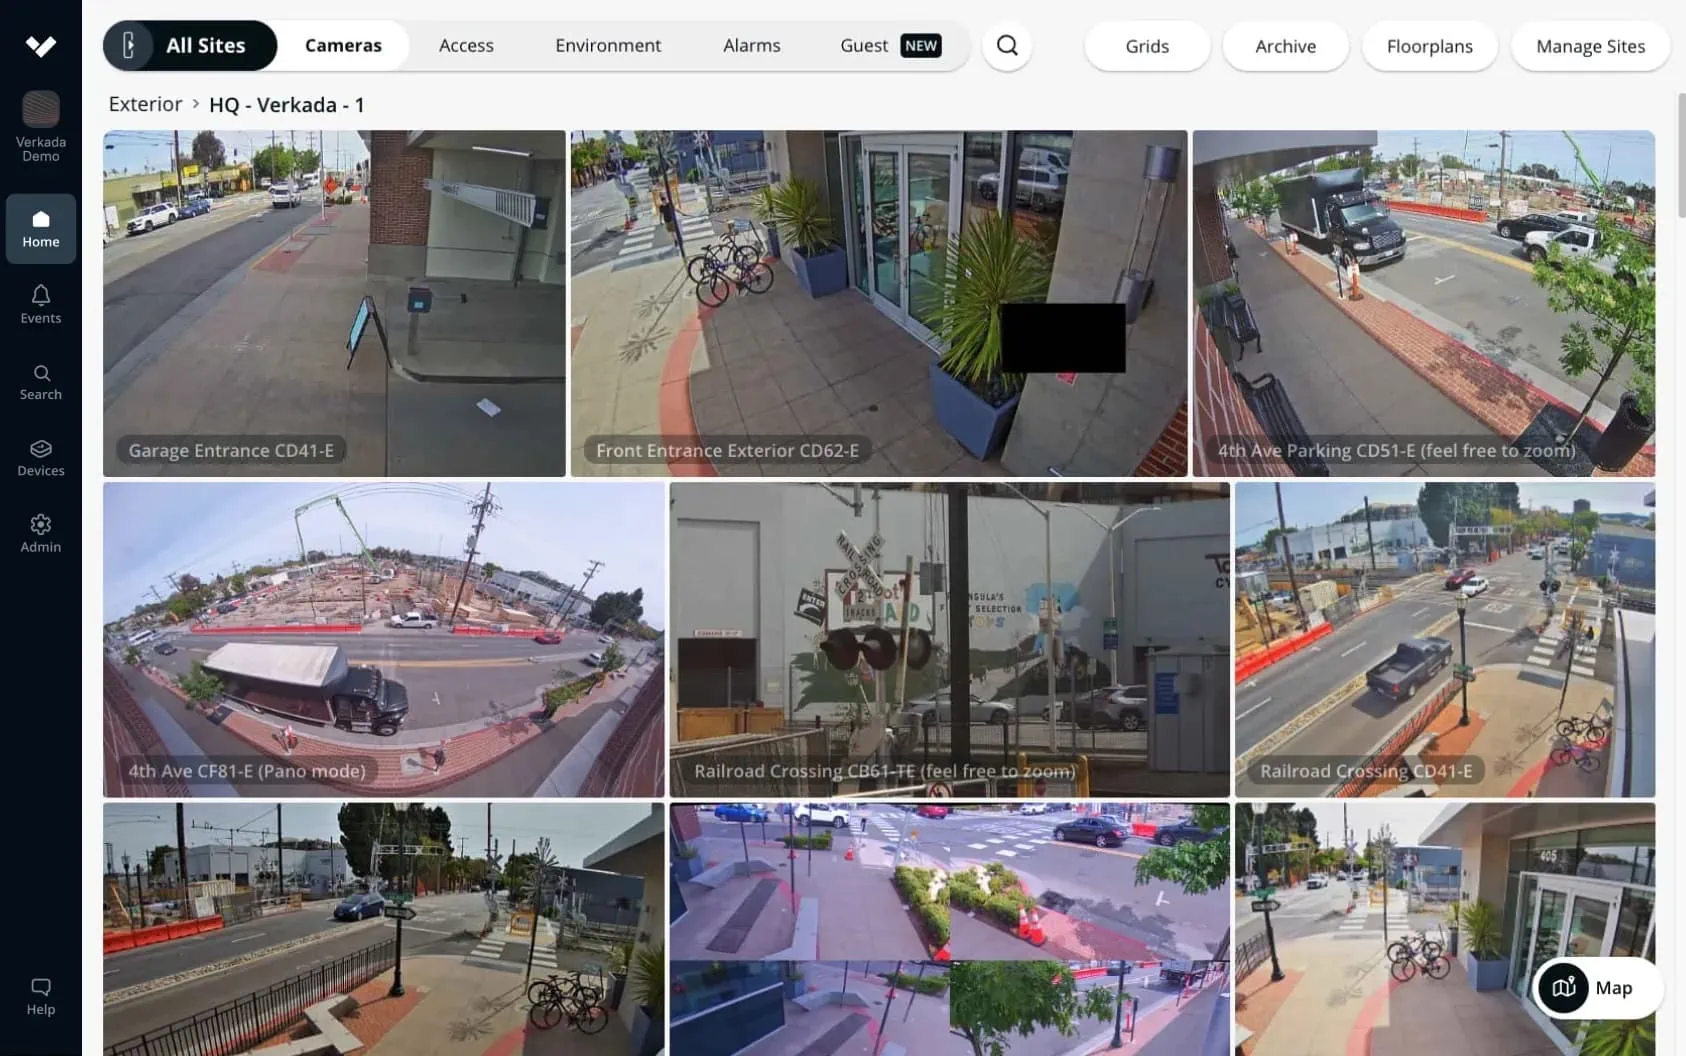 Remote monitoring and video analytics for enhanced security